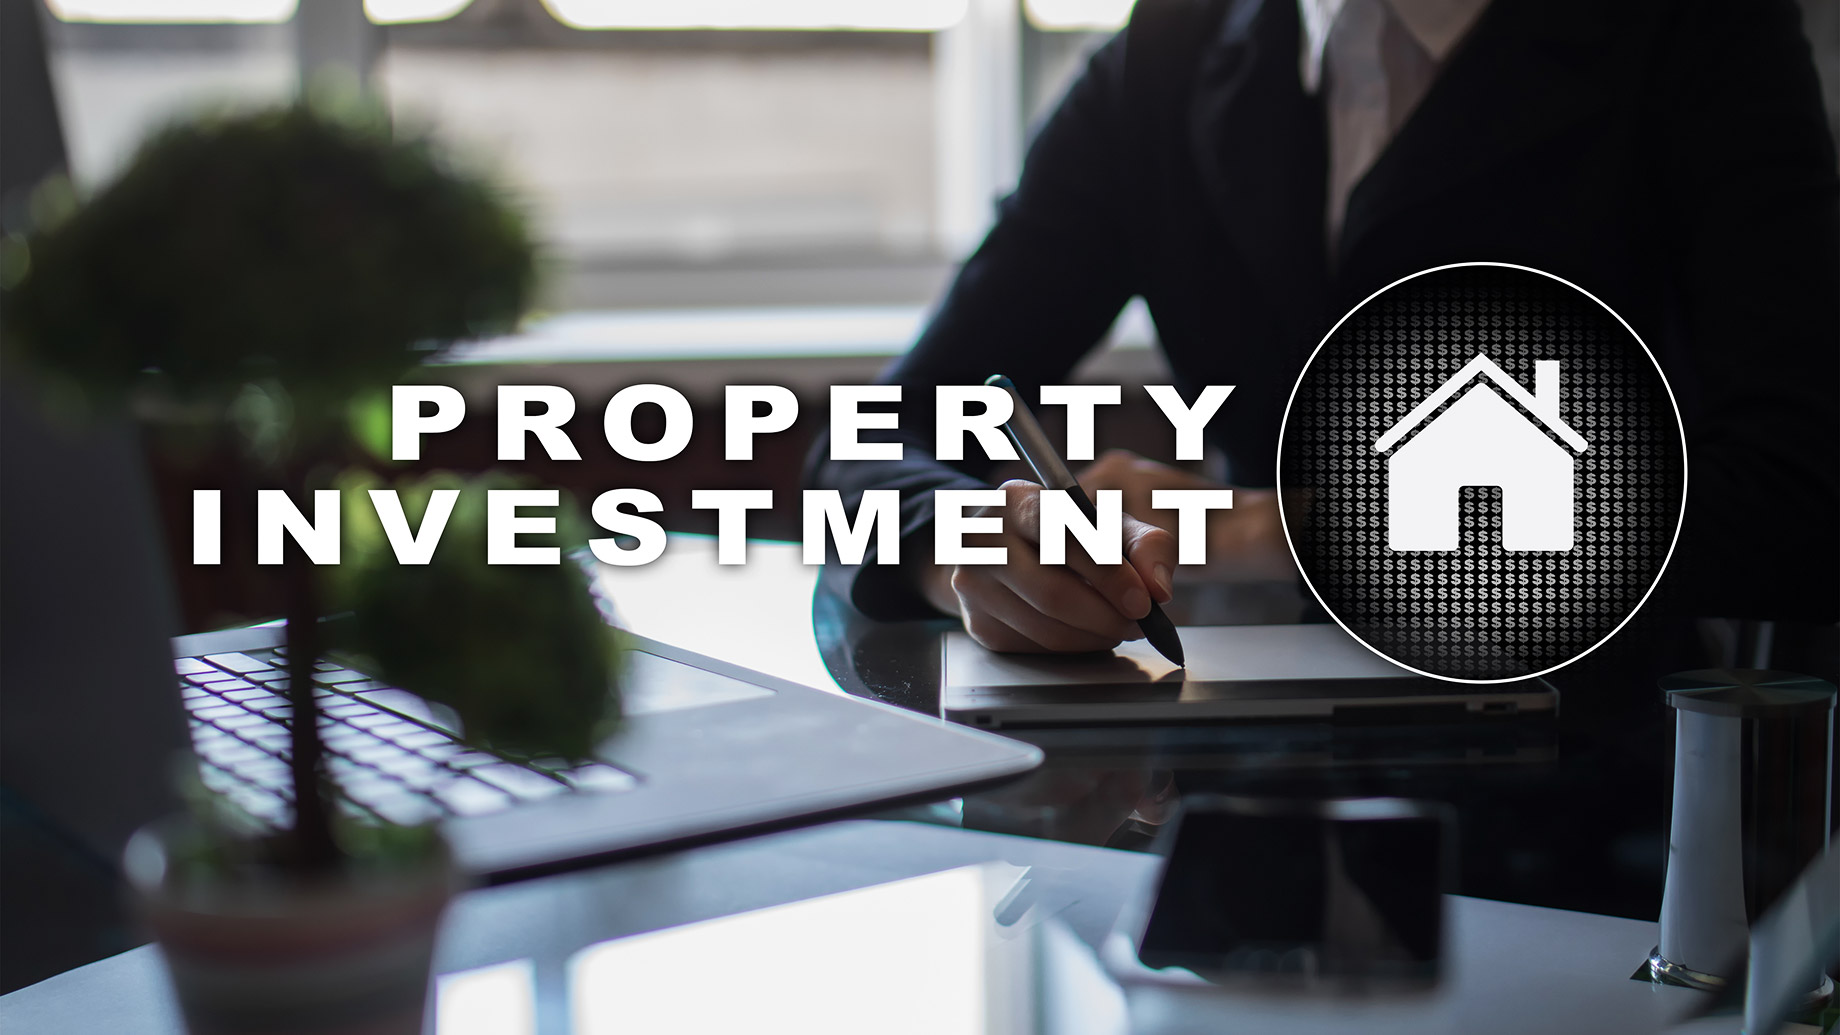 4 Investment Options for Real Estate Investing